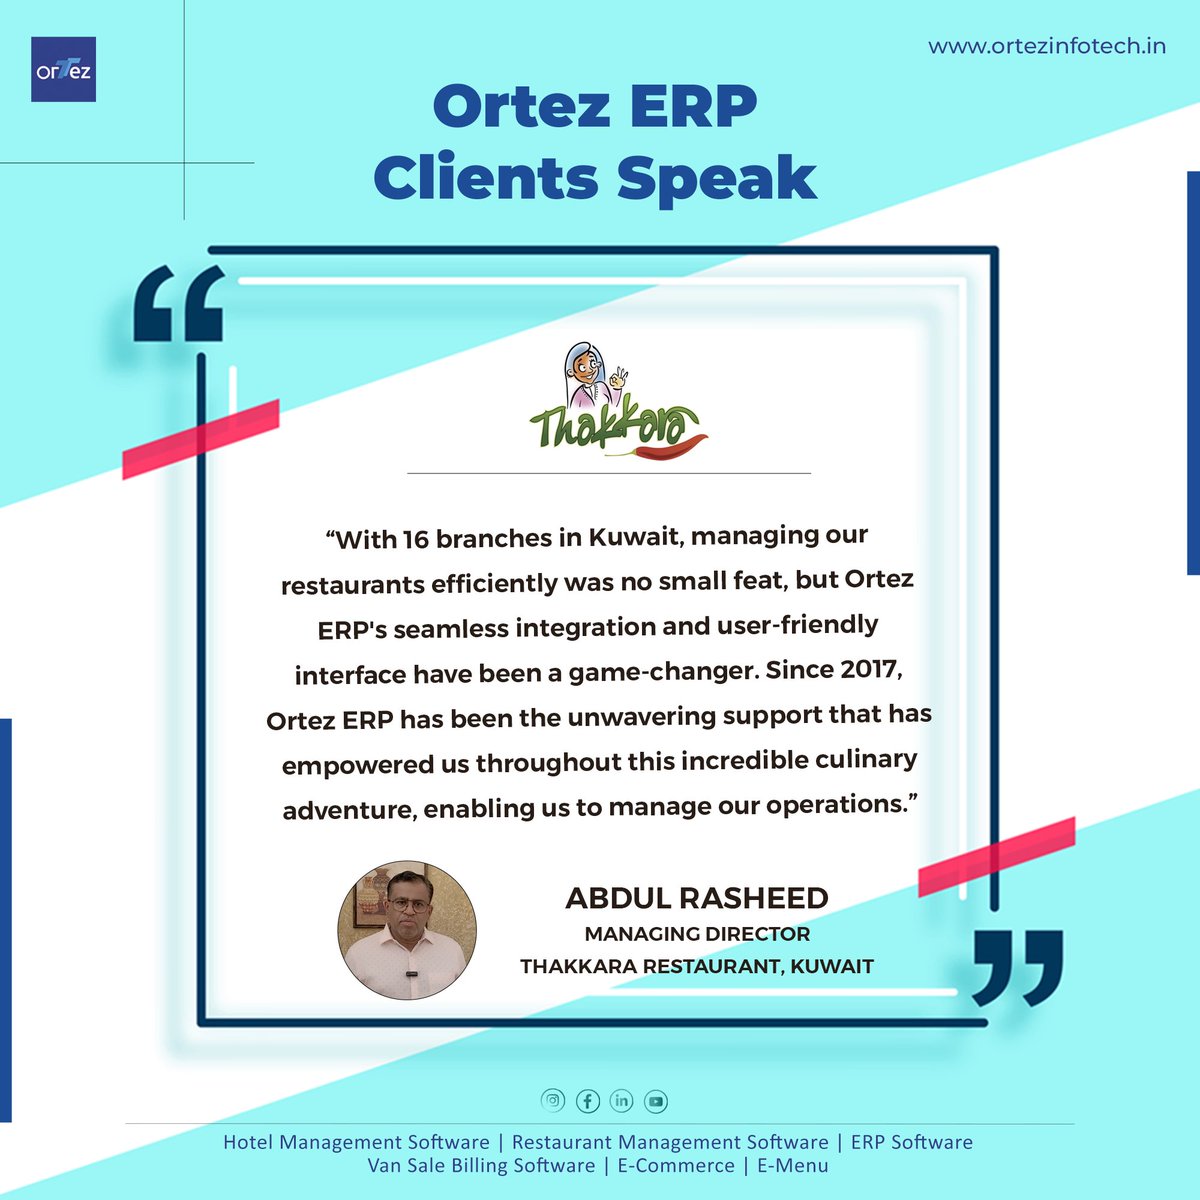 With 16 branches in Kuwait, managing our restaurants efficiently was no small feat, but Ortez ERP's seamless integration and user-friendly interface have been a game-changer since 2019. - ABDUL RASHEED, MANAGING DIRECTOR, THAKKARA RESTAURANT, KUWAIT
ortezinfotech.in/testimonial-th…